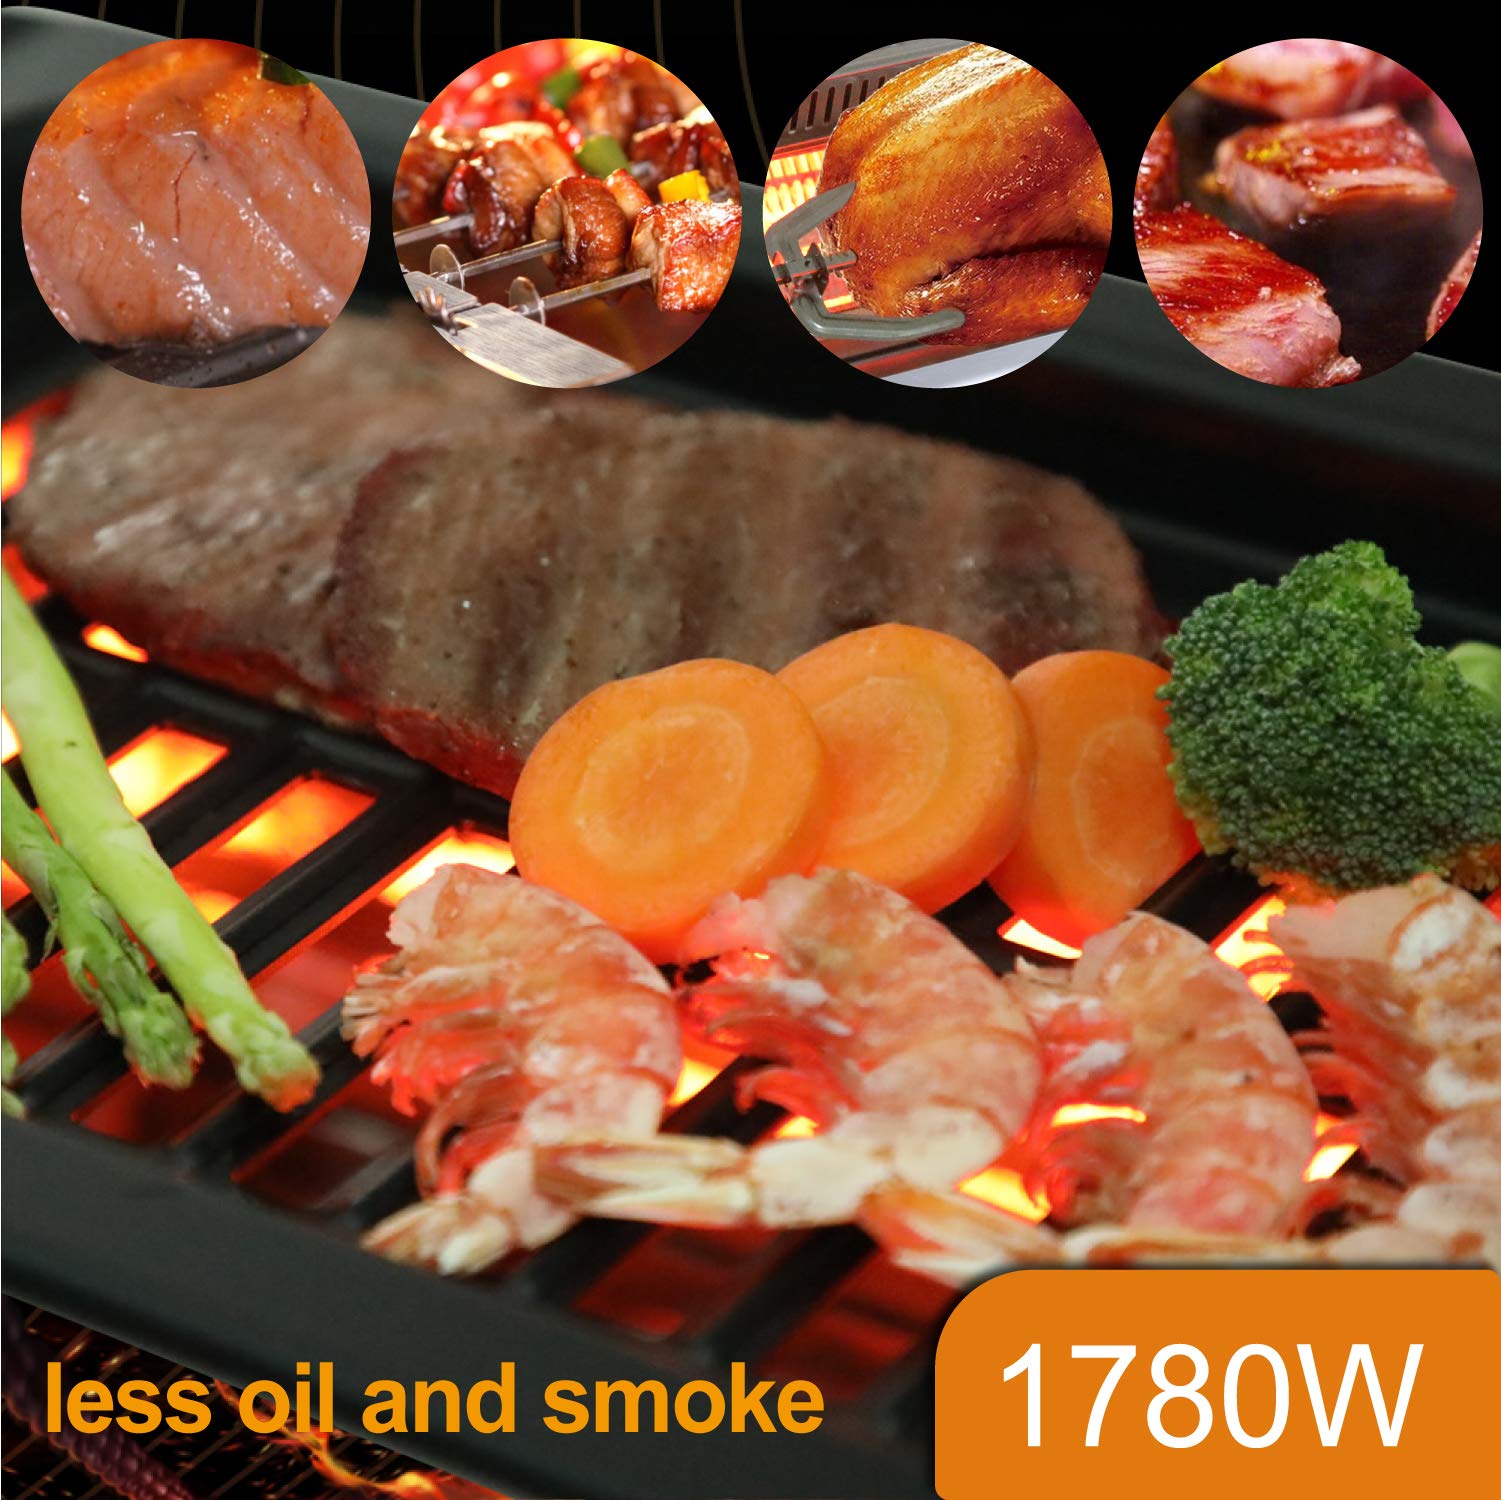 KAIZEN Indoor Electric BBQ Grill 1300W Kitchen Tabletop Portable